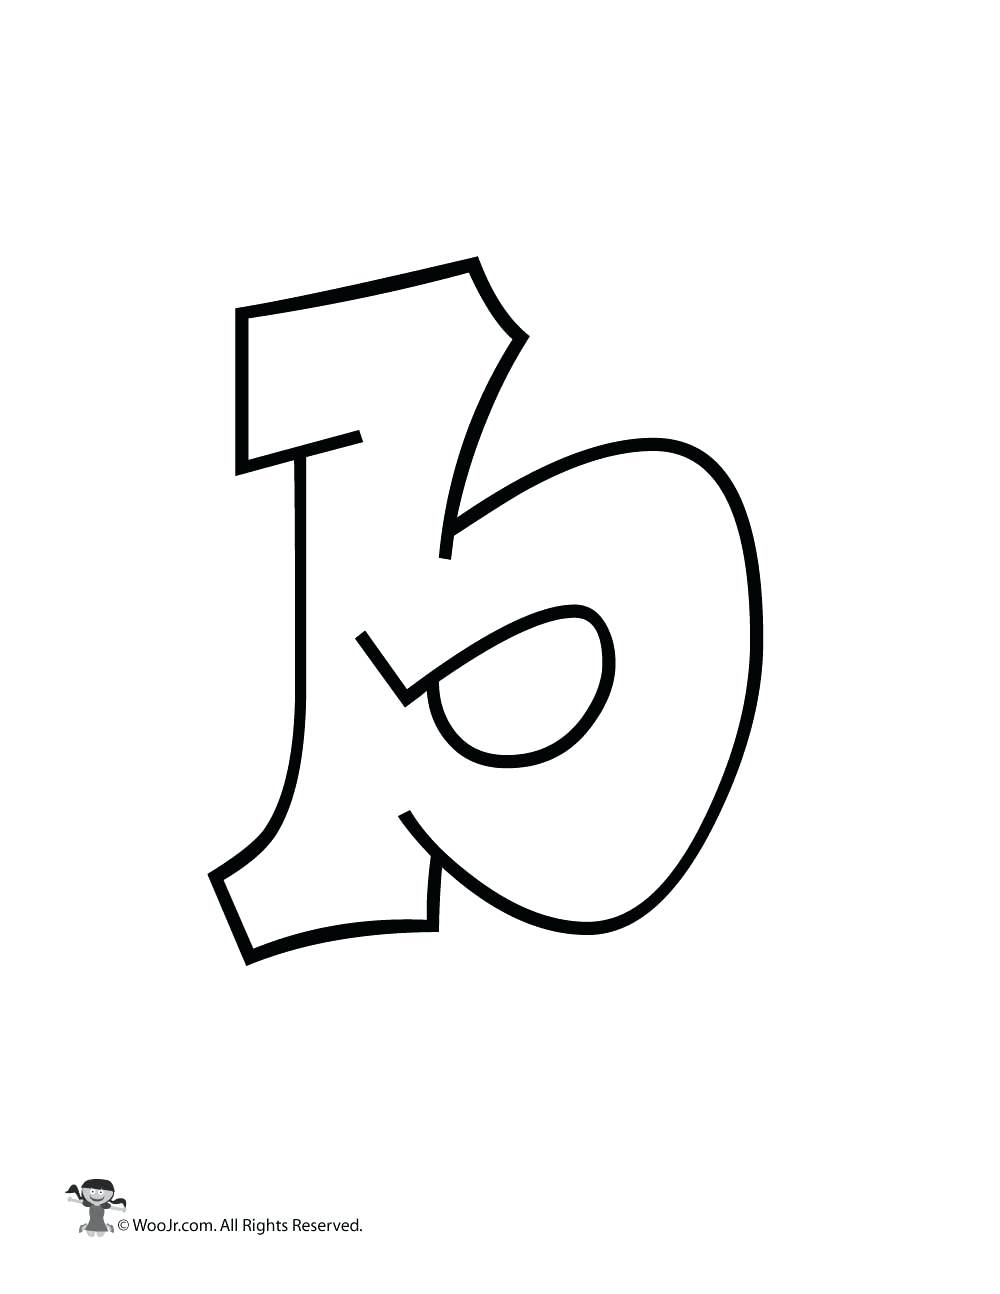 White Lowercase B Logo - Lowercase B Capital And Lowercase F In Cursive